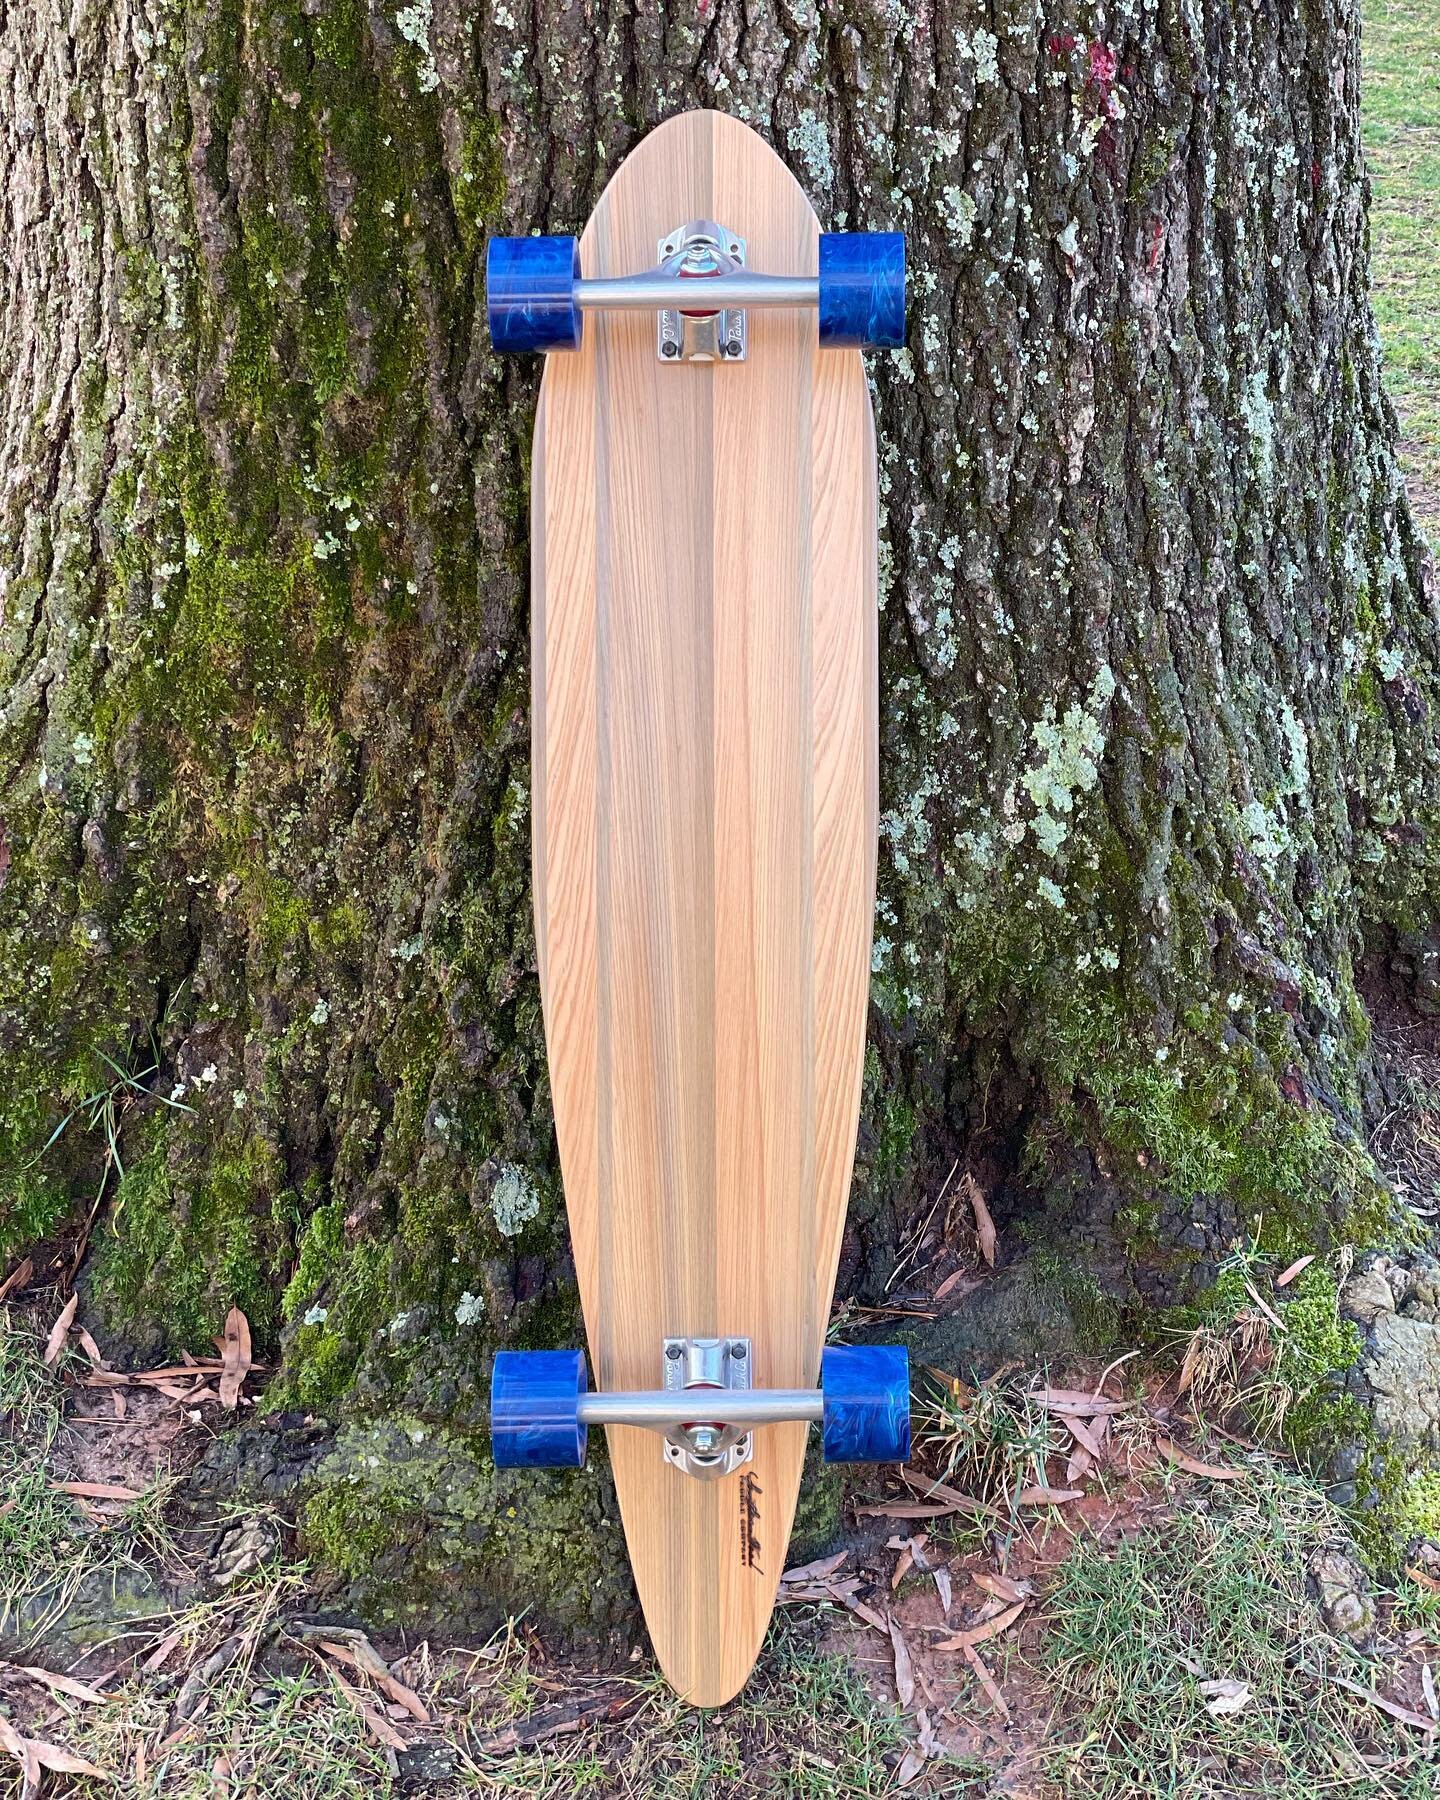 A new longboard is on its way to Delaware!  I&rsquo;m super happy with the look of this board. The pics don&rsquo;t do it justice. Nice weather is just around the corner and letting your inner child out on a handmade skateboard is a great way to enjo